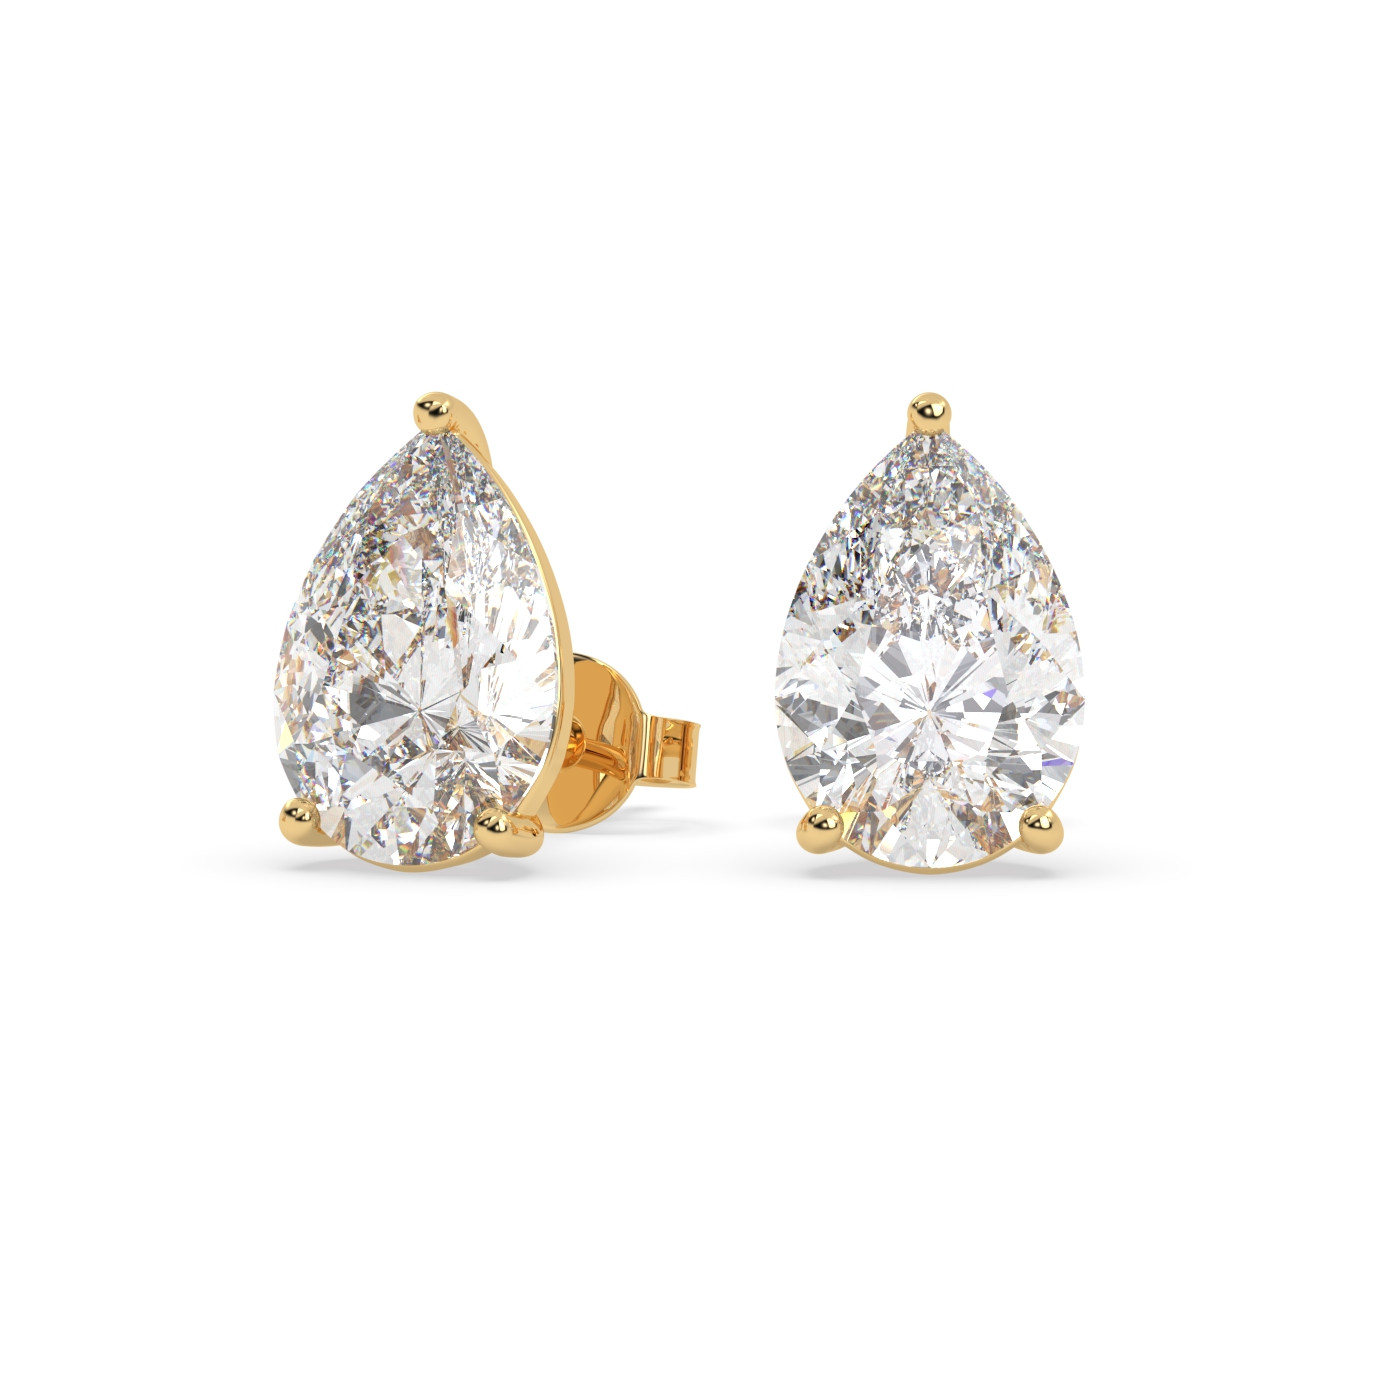 18k yellow gold  1.0 carat pear stud earrings with butterfly back Photos & images